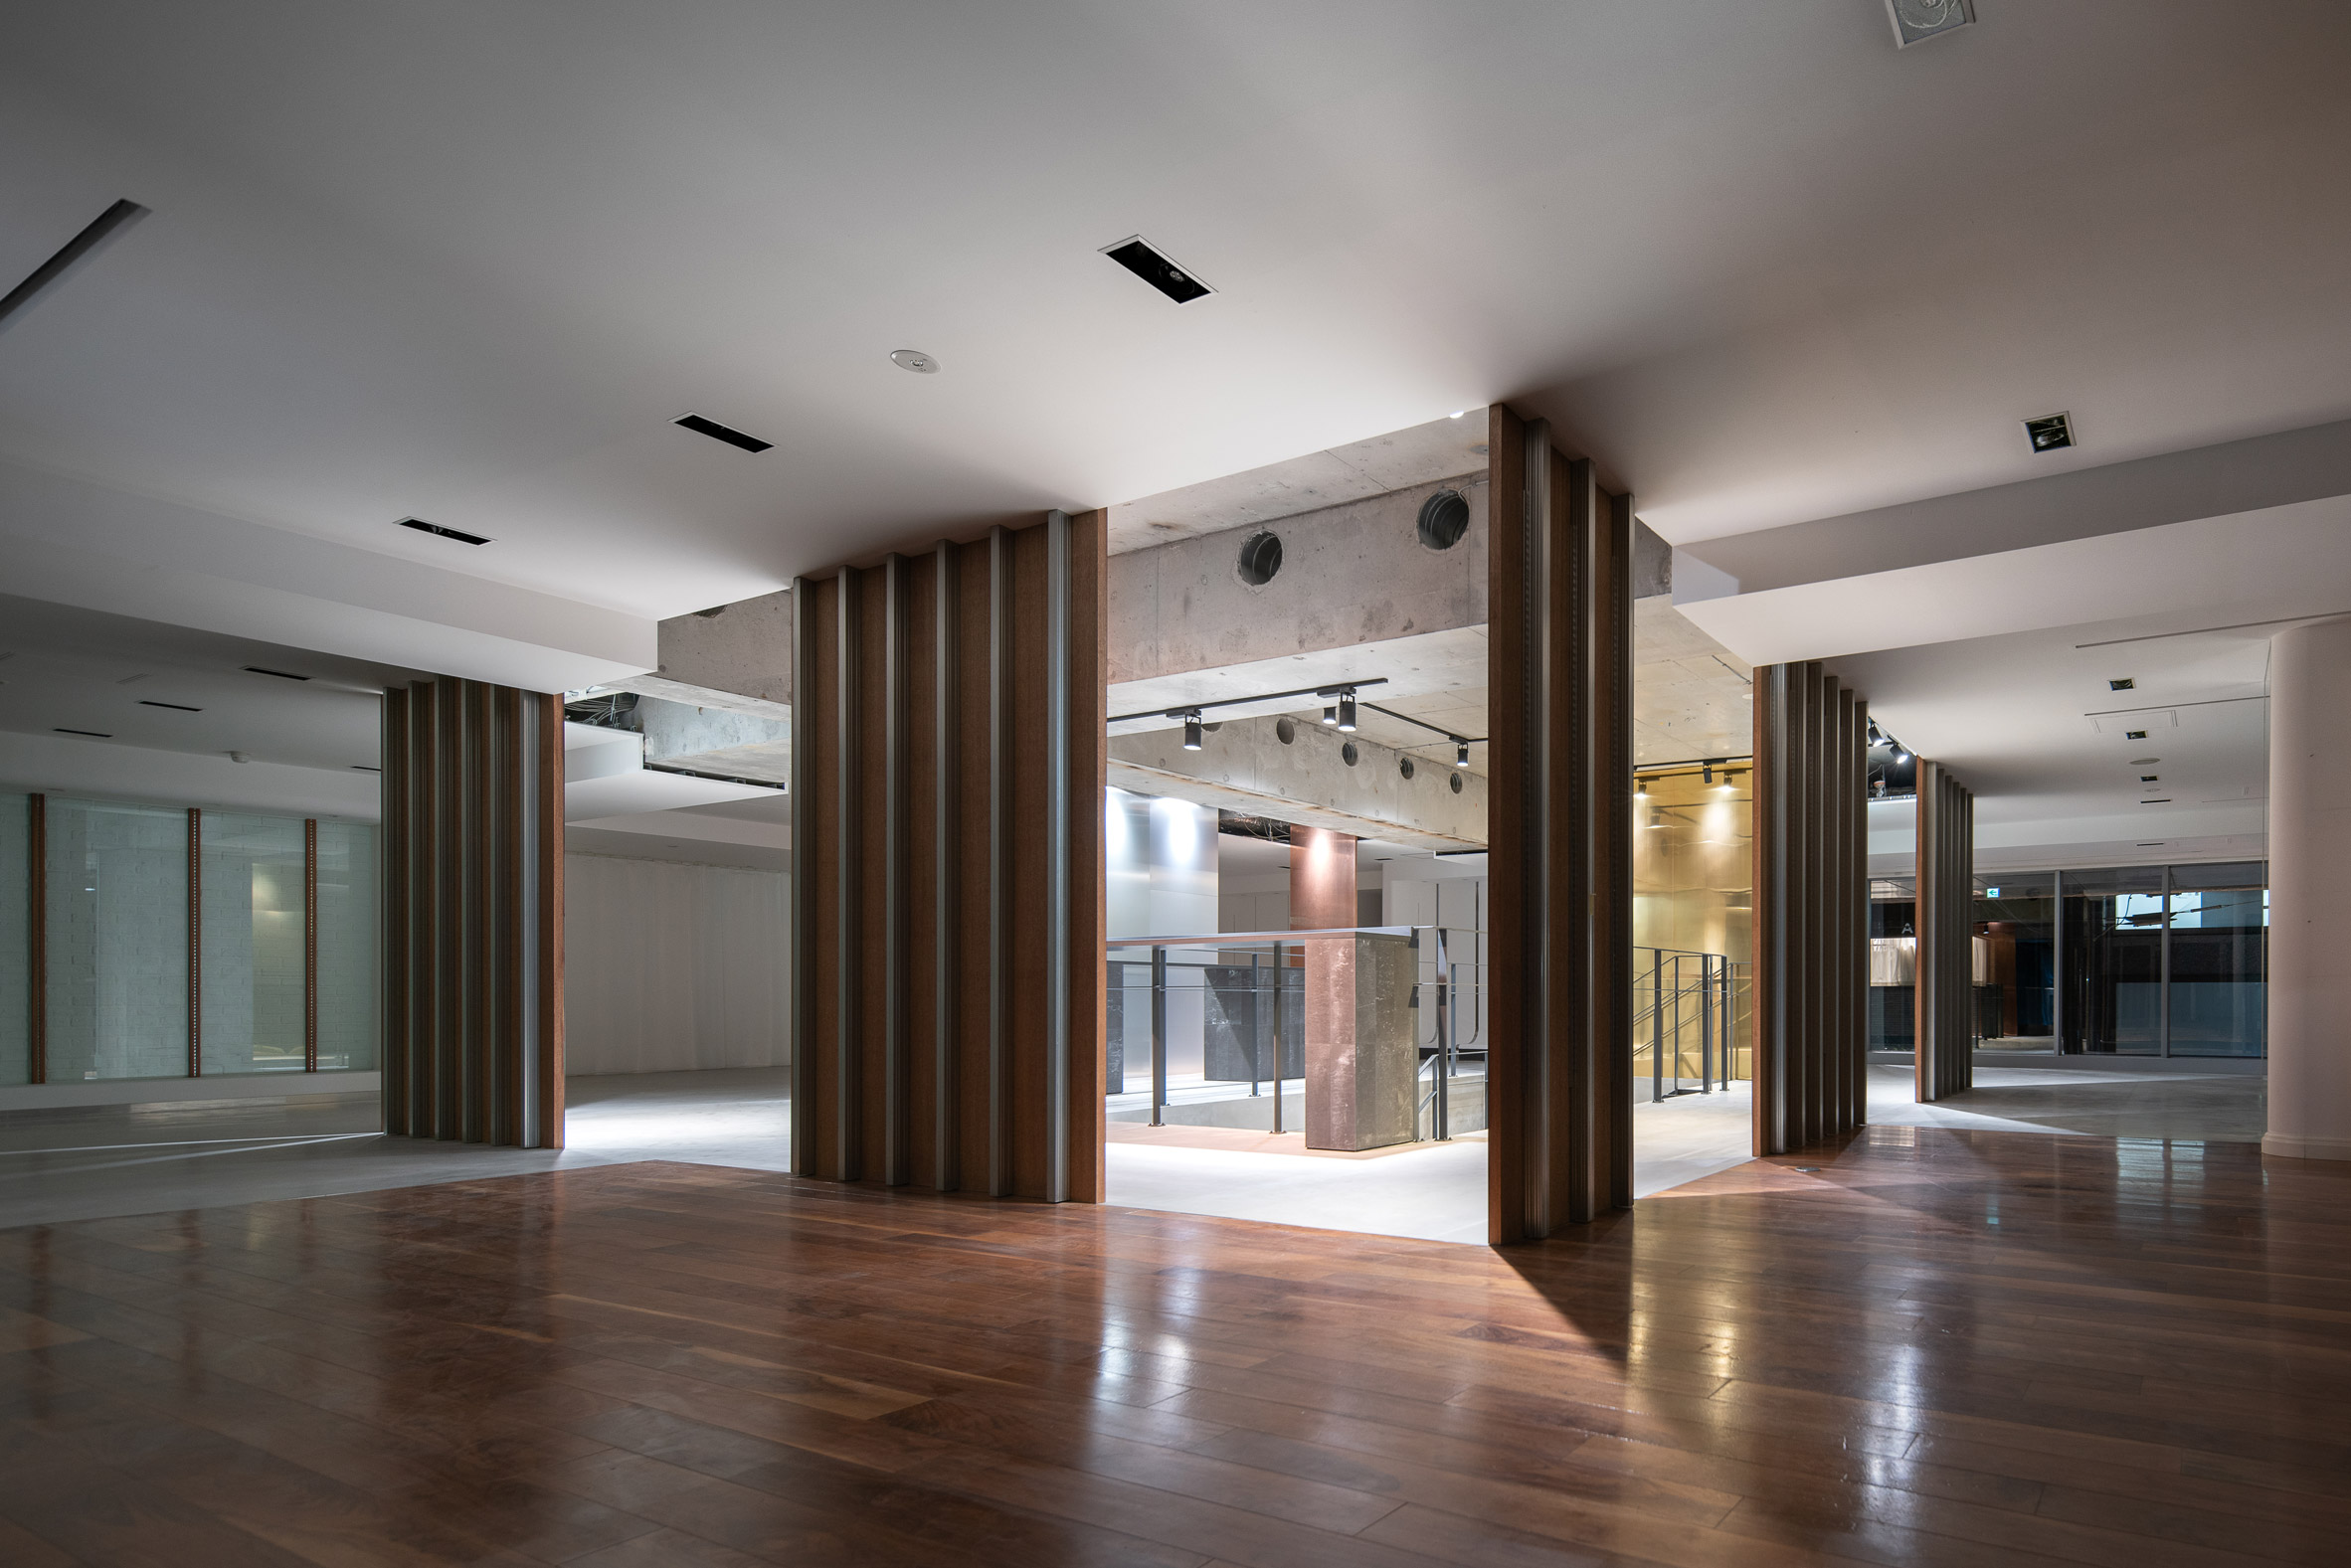 Pan Projects' design for Ayoama fashion store